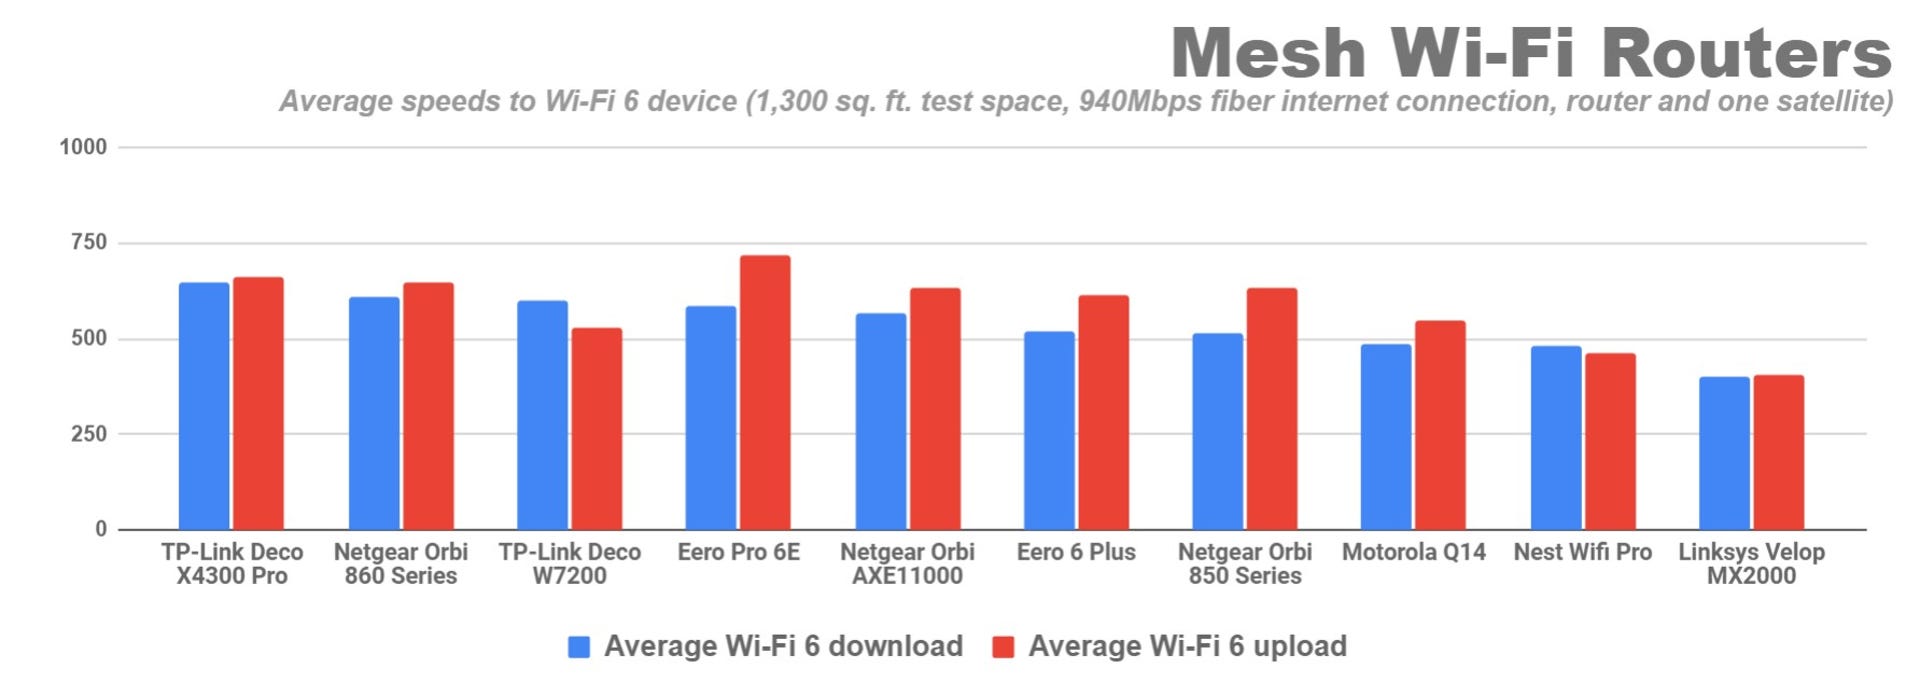 A bar graph shows the average wireless upload and download speeds of ten different mesh systems to a Wi-Fi 6 laptop in a 1,300 sq. ft. test space with a gigabit fiber connection. The TP-Link Deco X4300 Pro has the fastest average downloads of all at 646 megabits per second, and the second fastest average uploads at 663Mbps (the only system with faster uploads, on average, was the Eero Pro 6E, at 720Mbps).